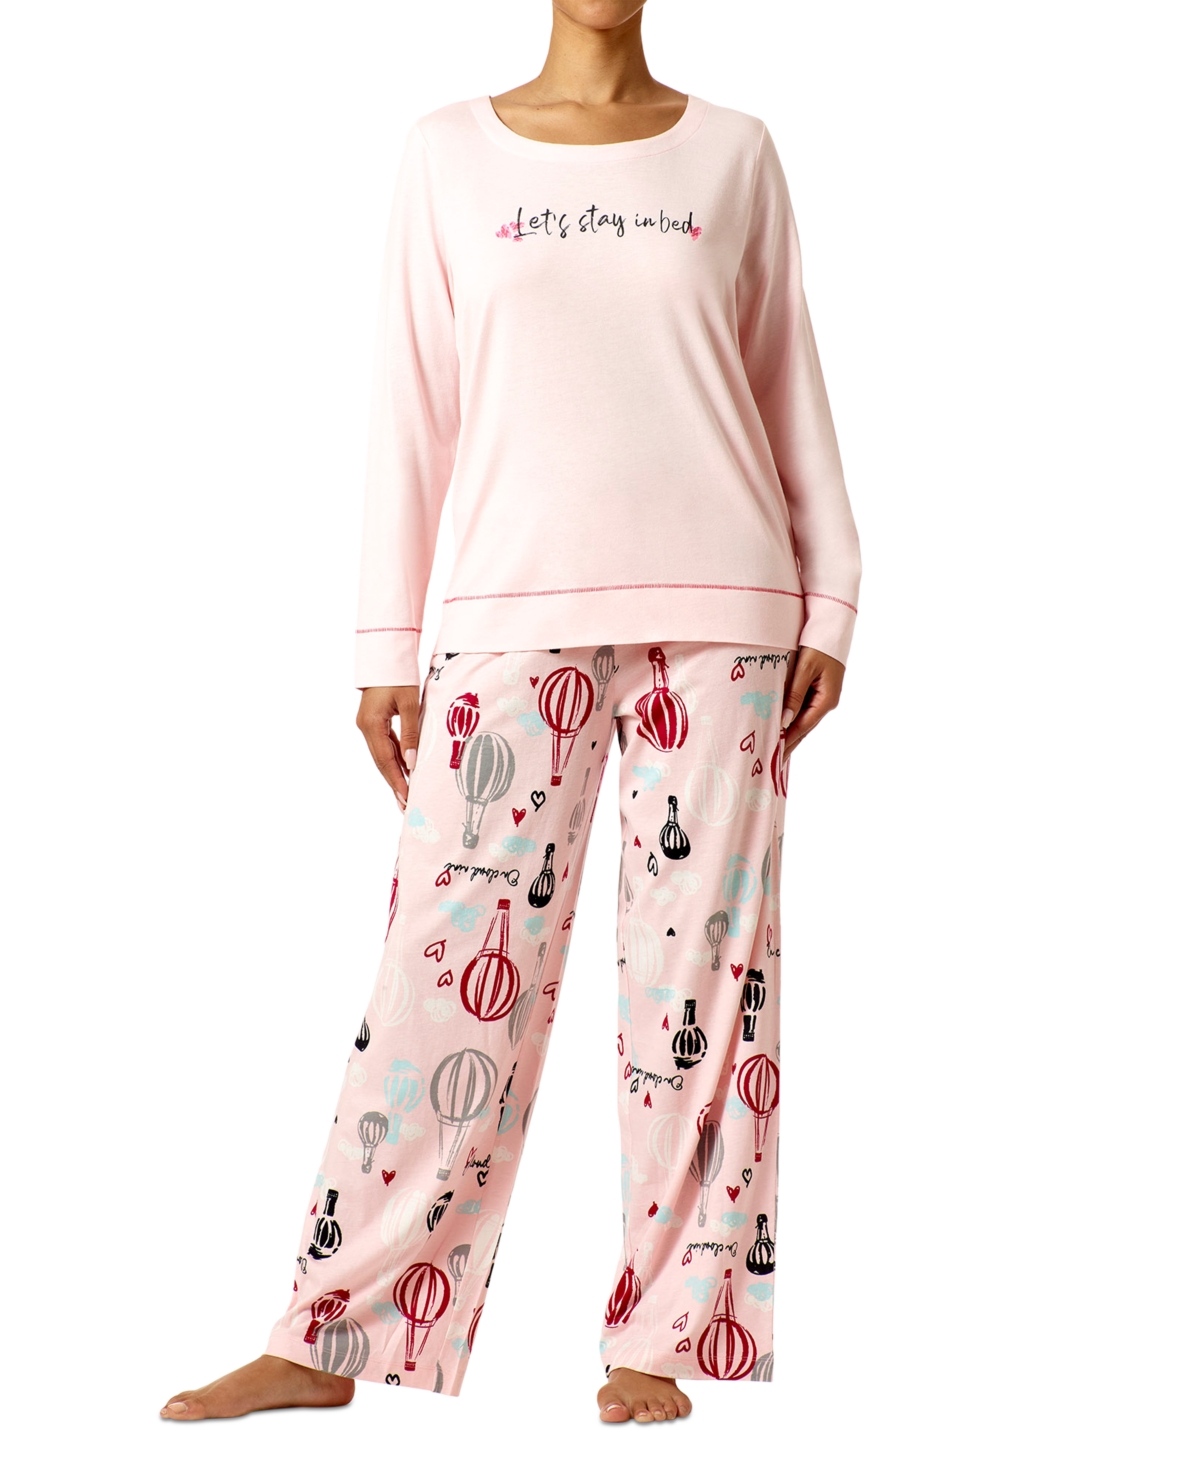 Hue Women's Sleepwell Printed Knit Pajama Pant made with Temperature  Regulating Technology - Macy's